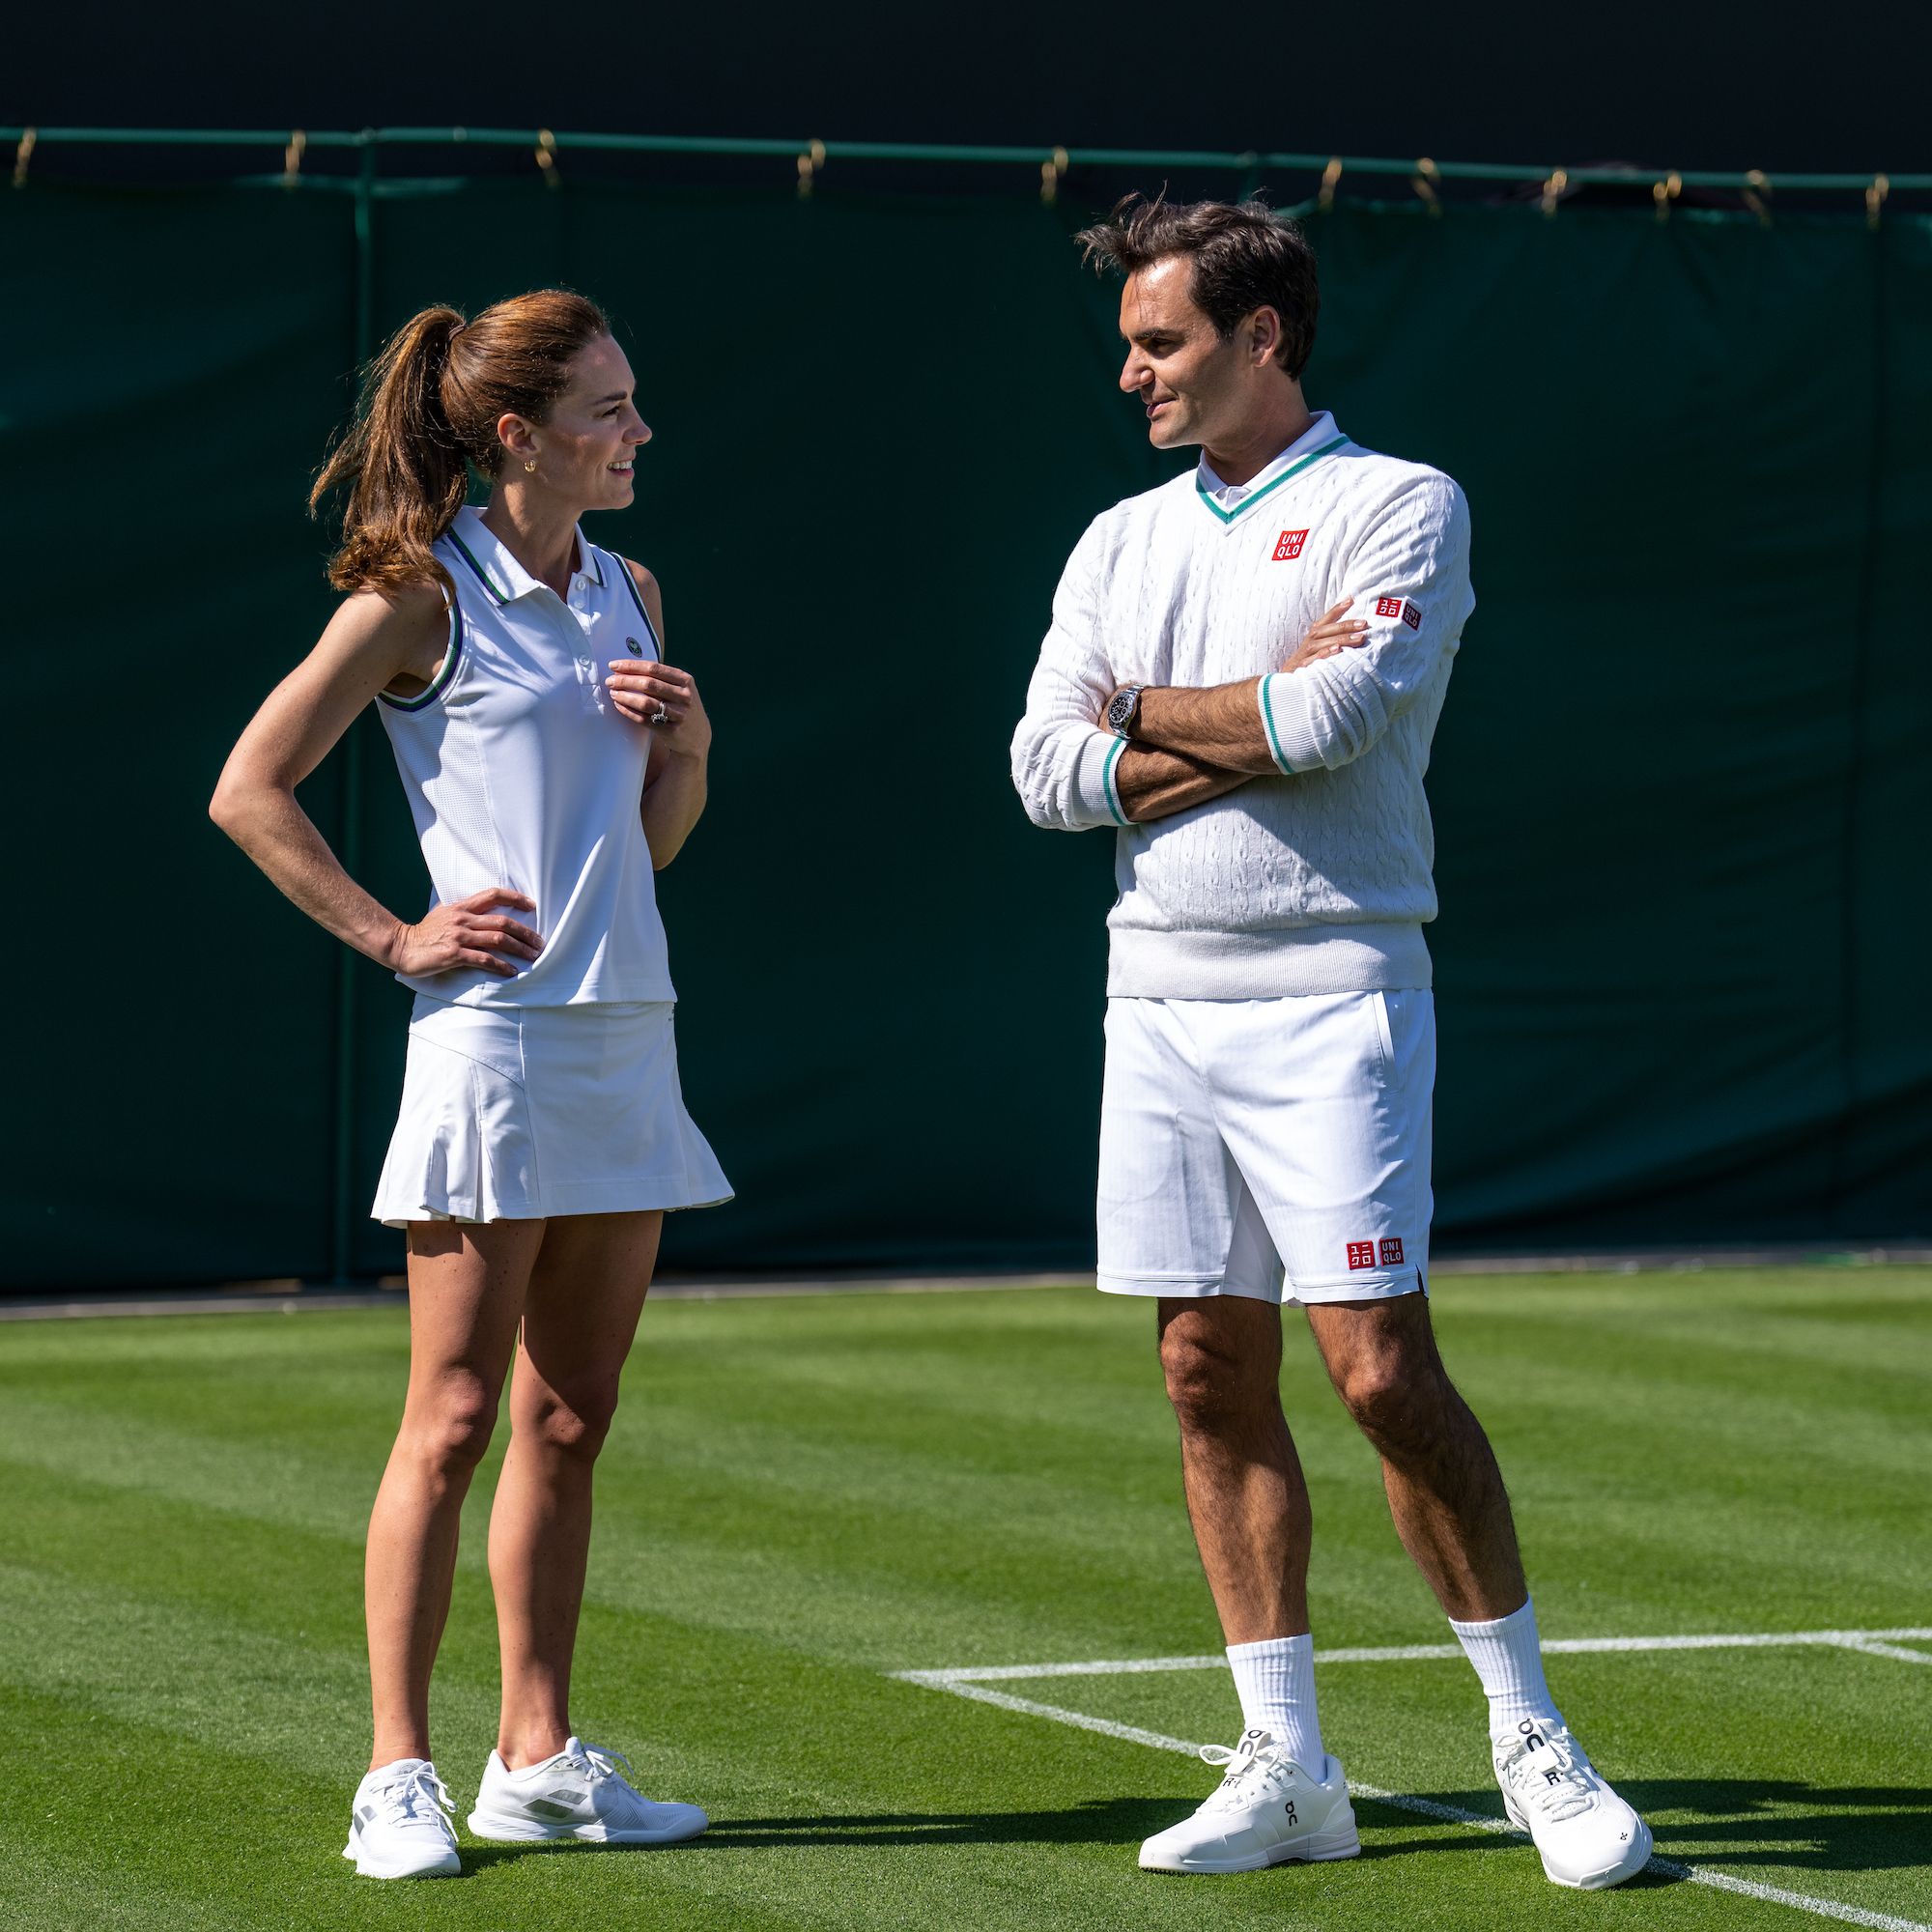 Kate Middleton Teams Up With Roger Federer to Celebrate Wimbledon Ball Boys and Girls